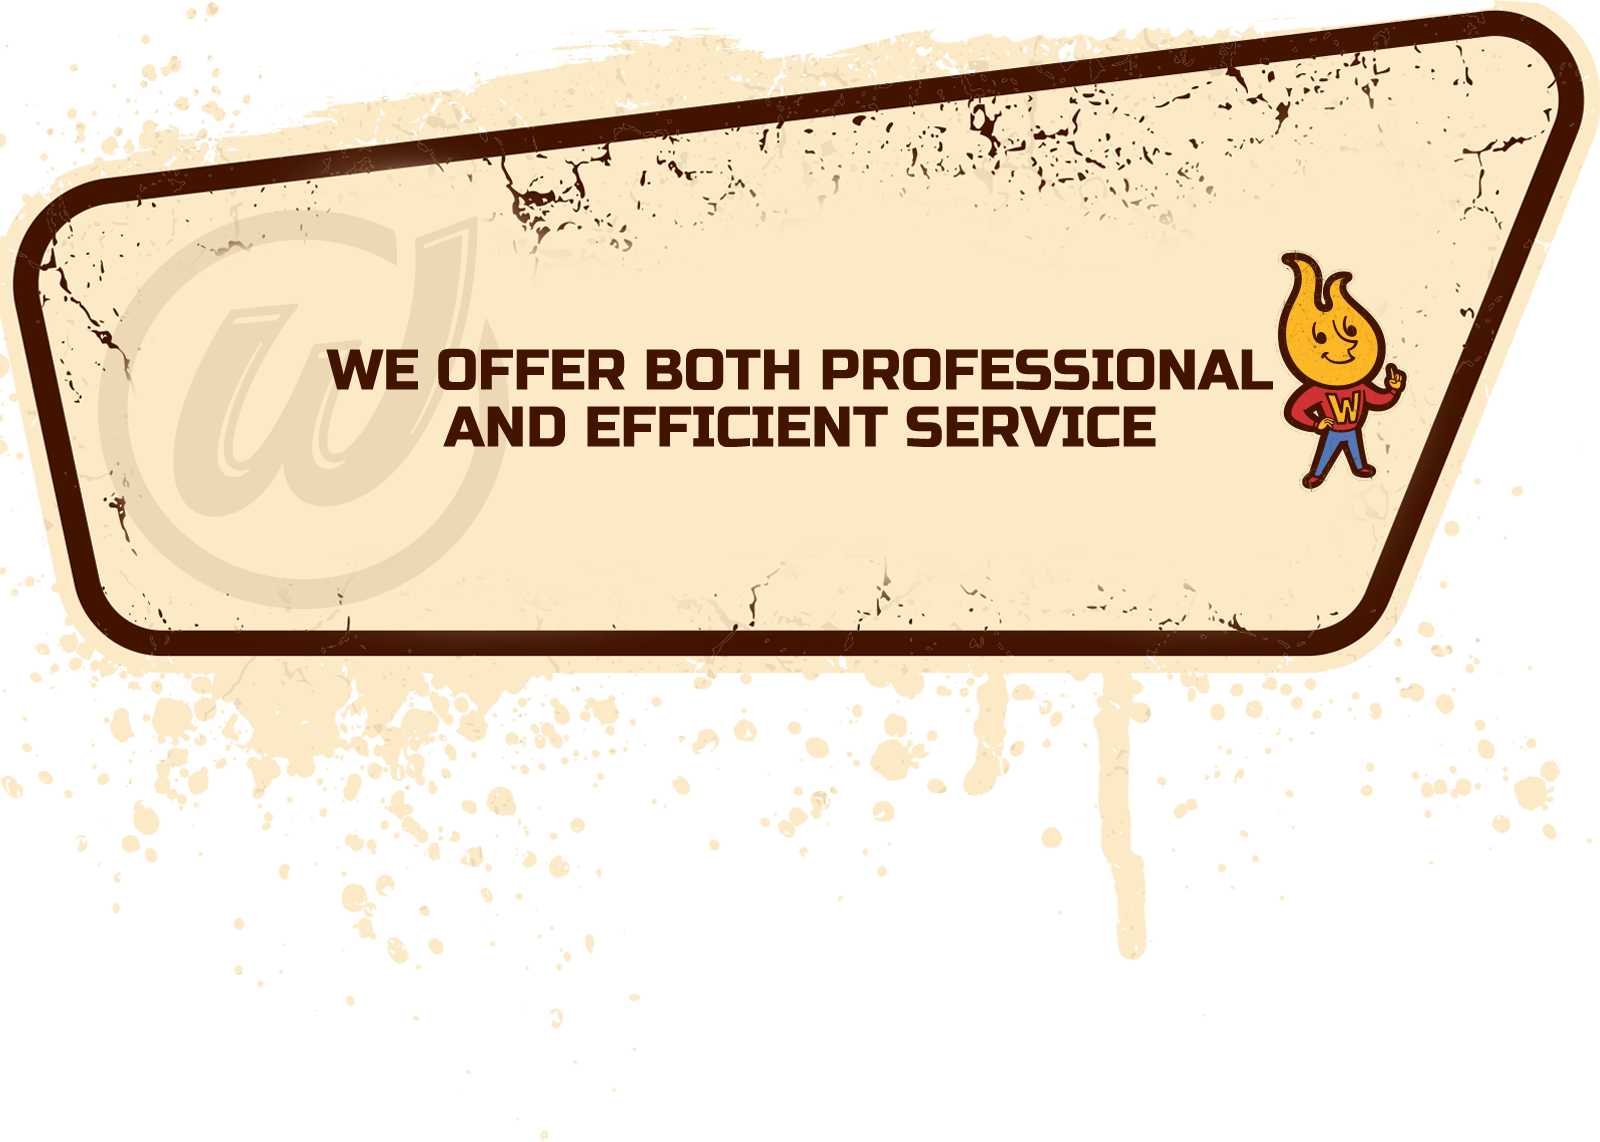 professional and efficient service